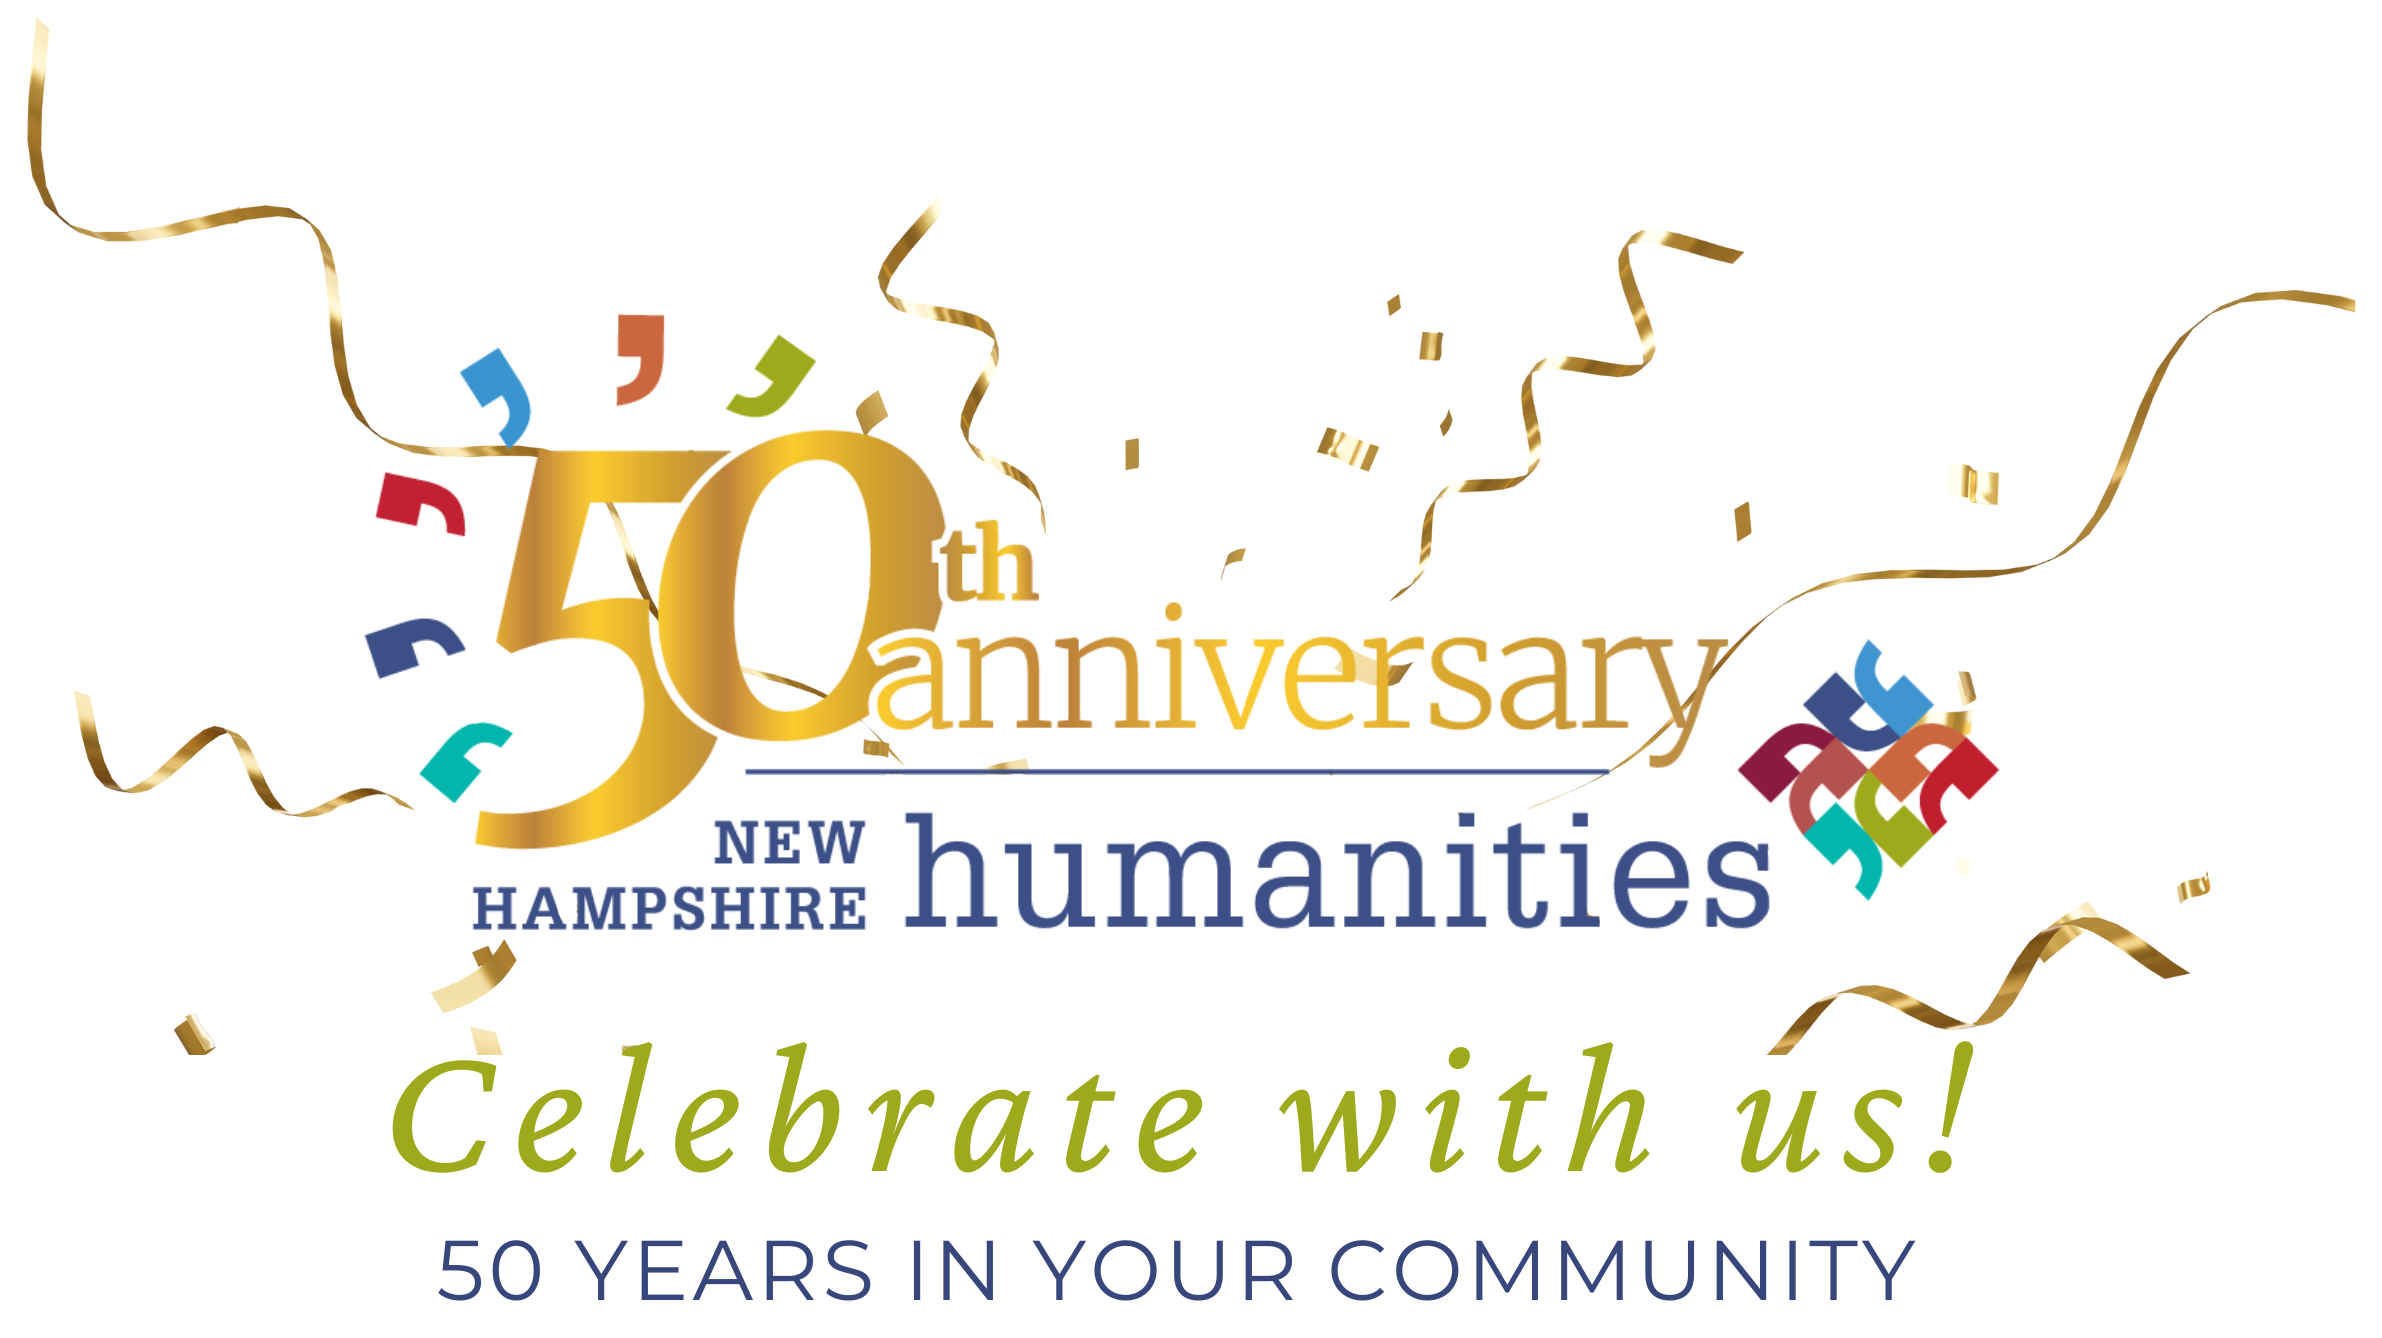 Celebrating 50 Years in Your Community